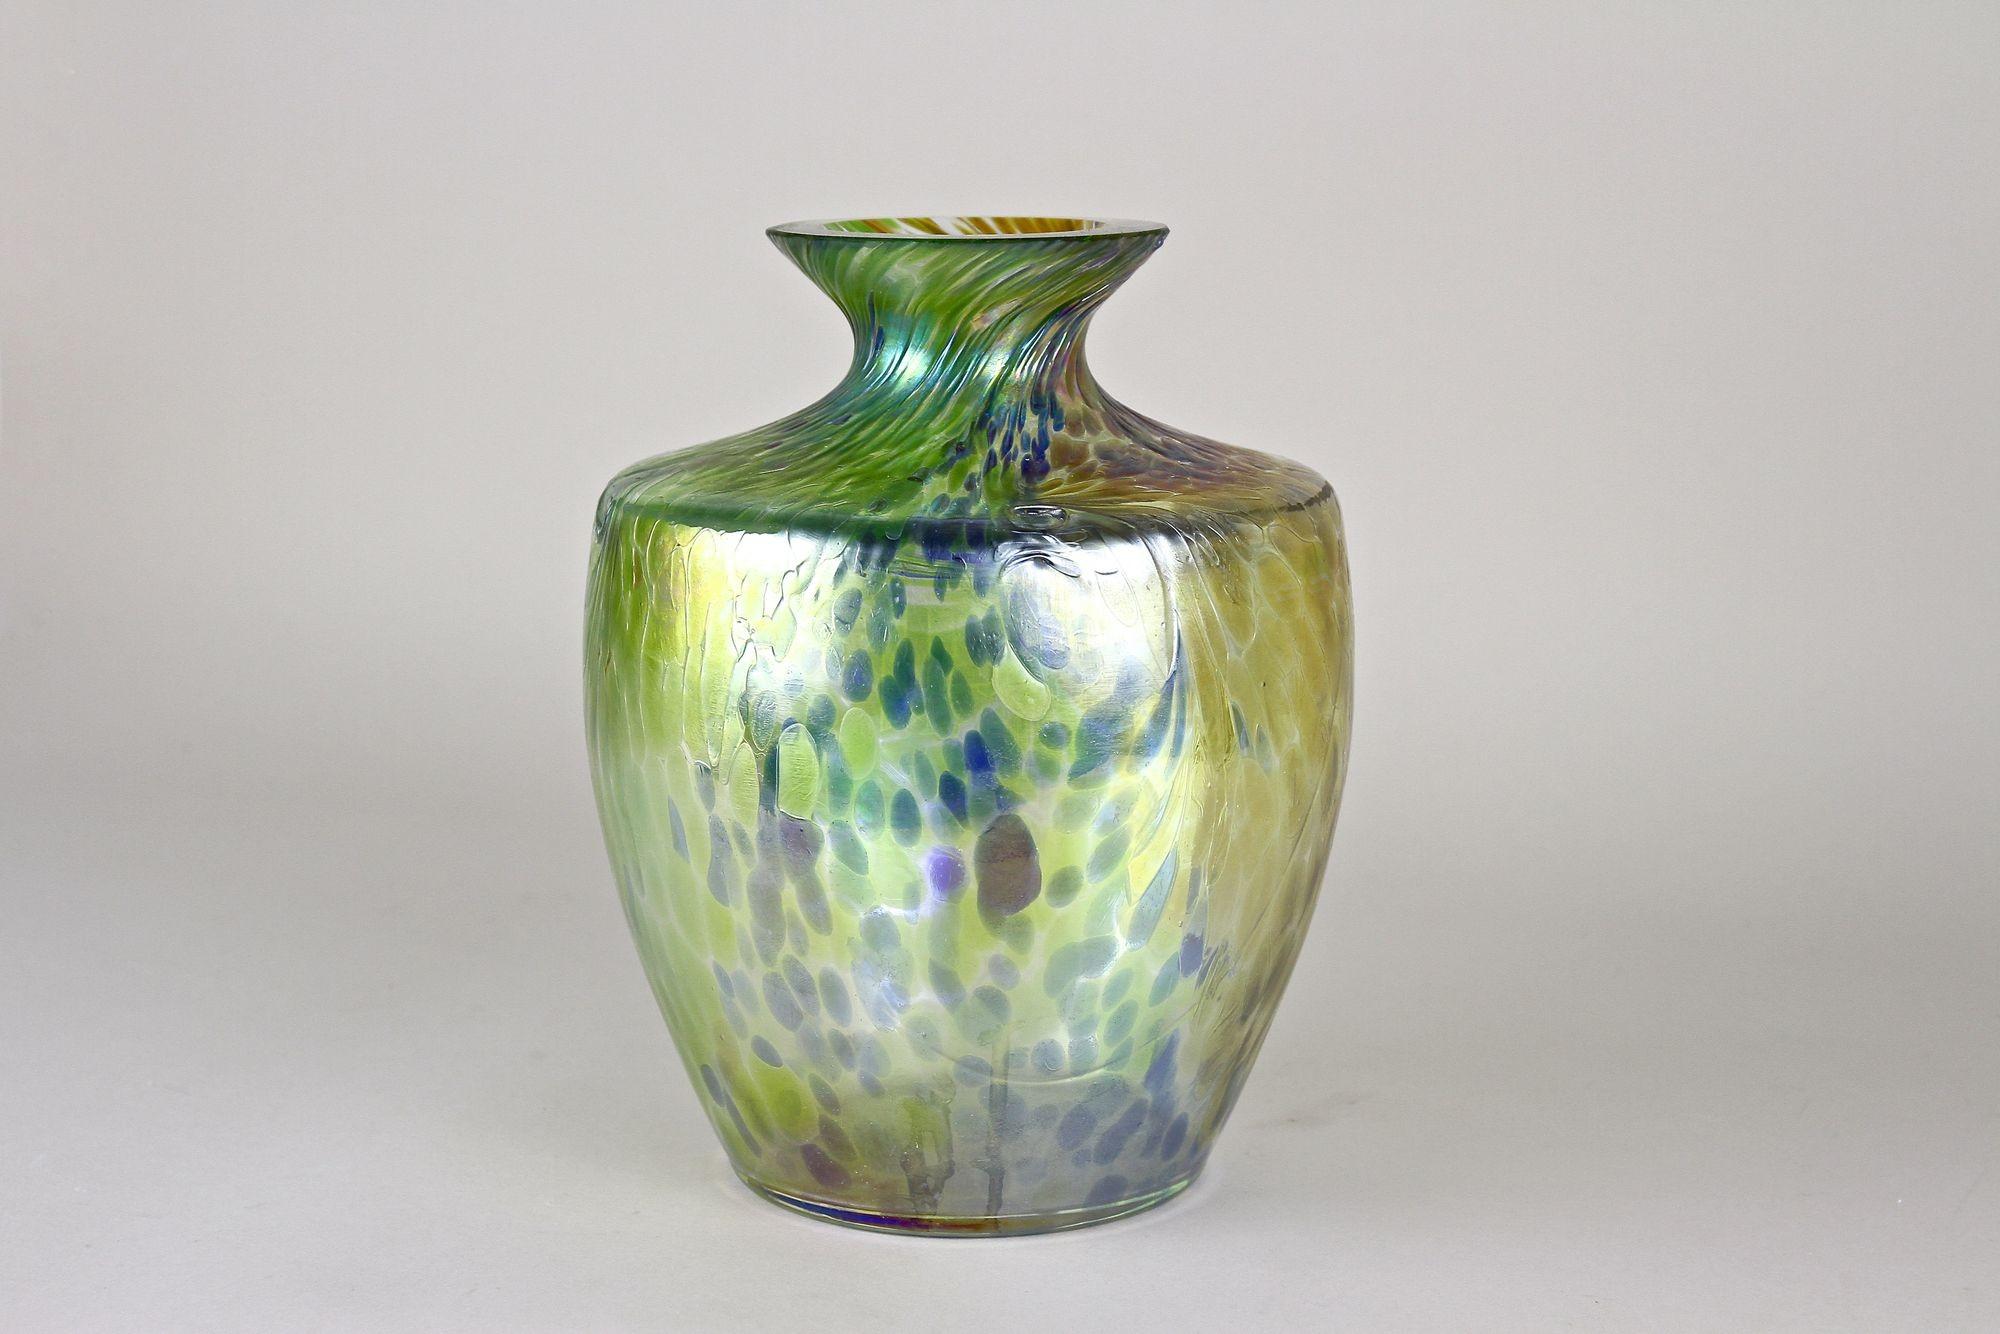 Iridescent Art Nouveau Glass Vase Attributed To Fritz Heckert, Bohemia ca. 1905 For Sale 14